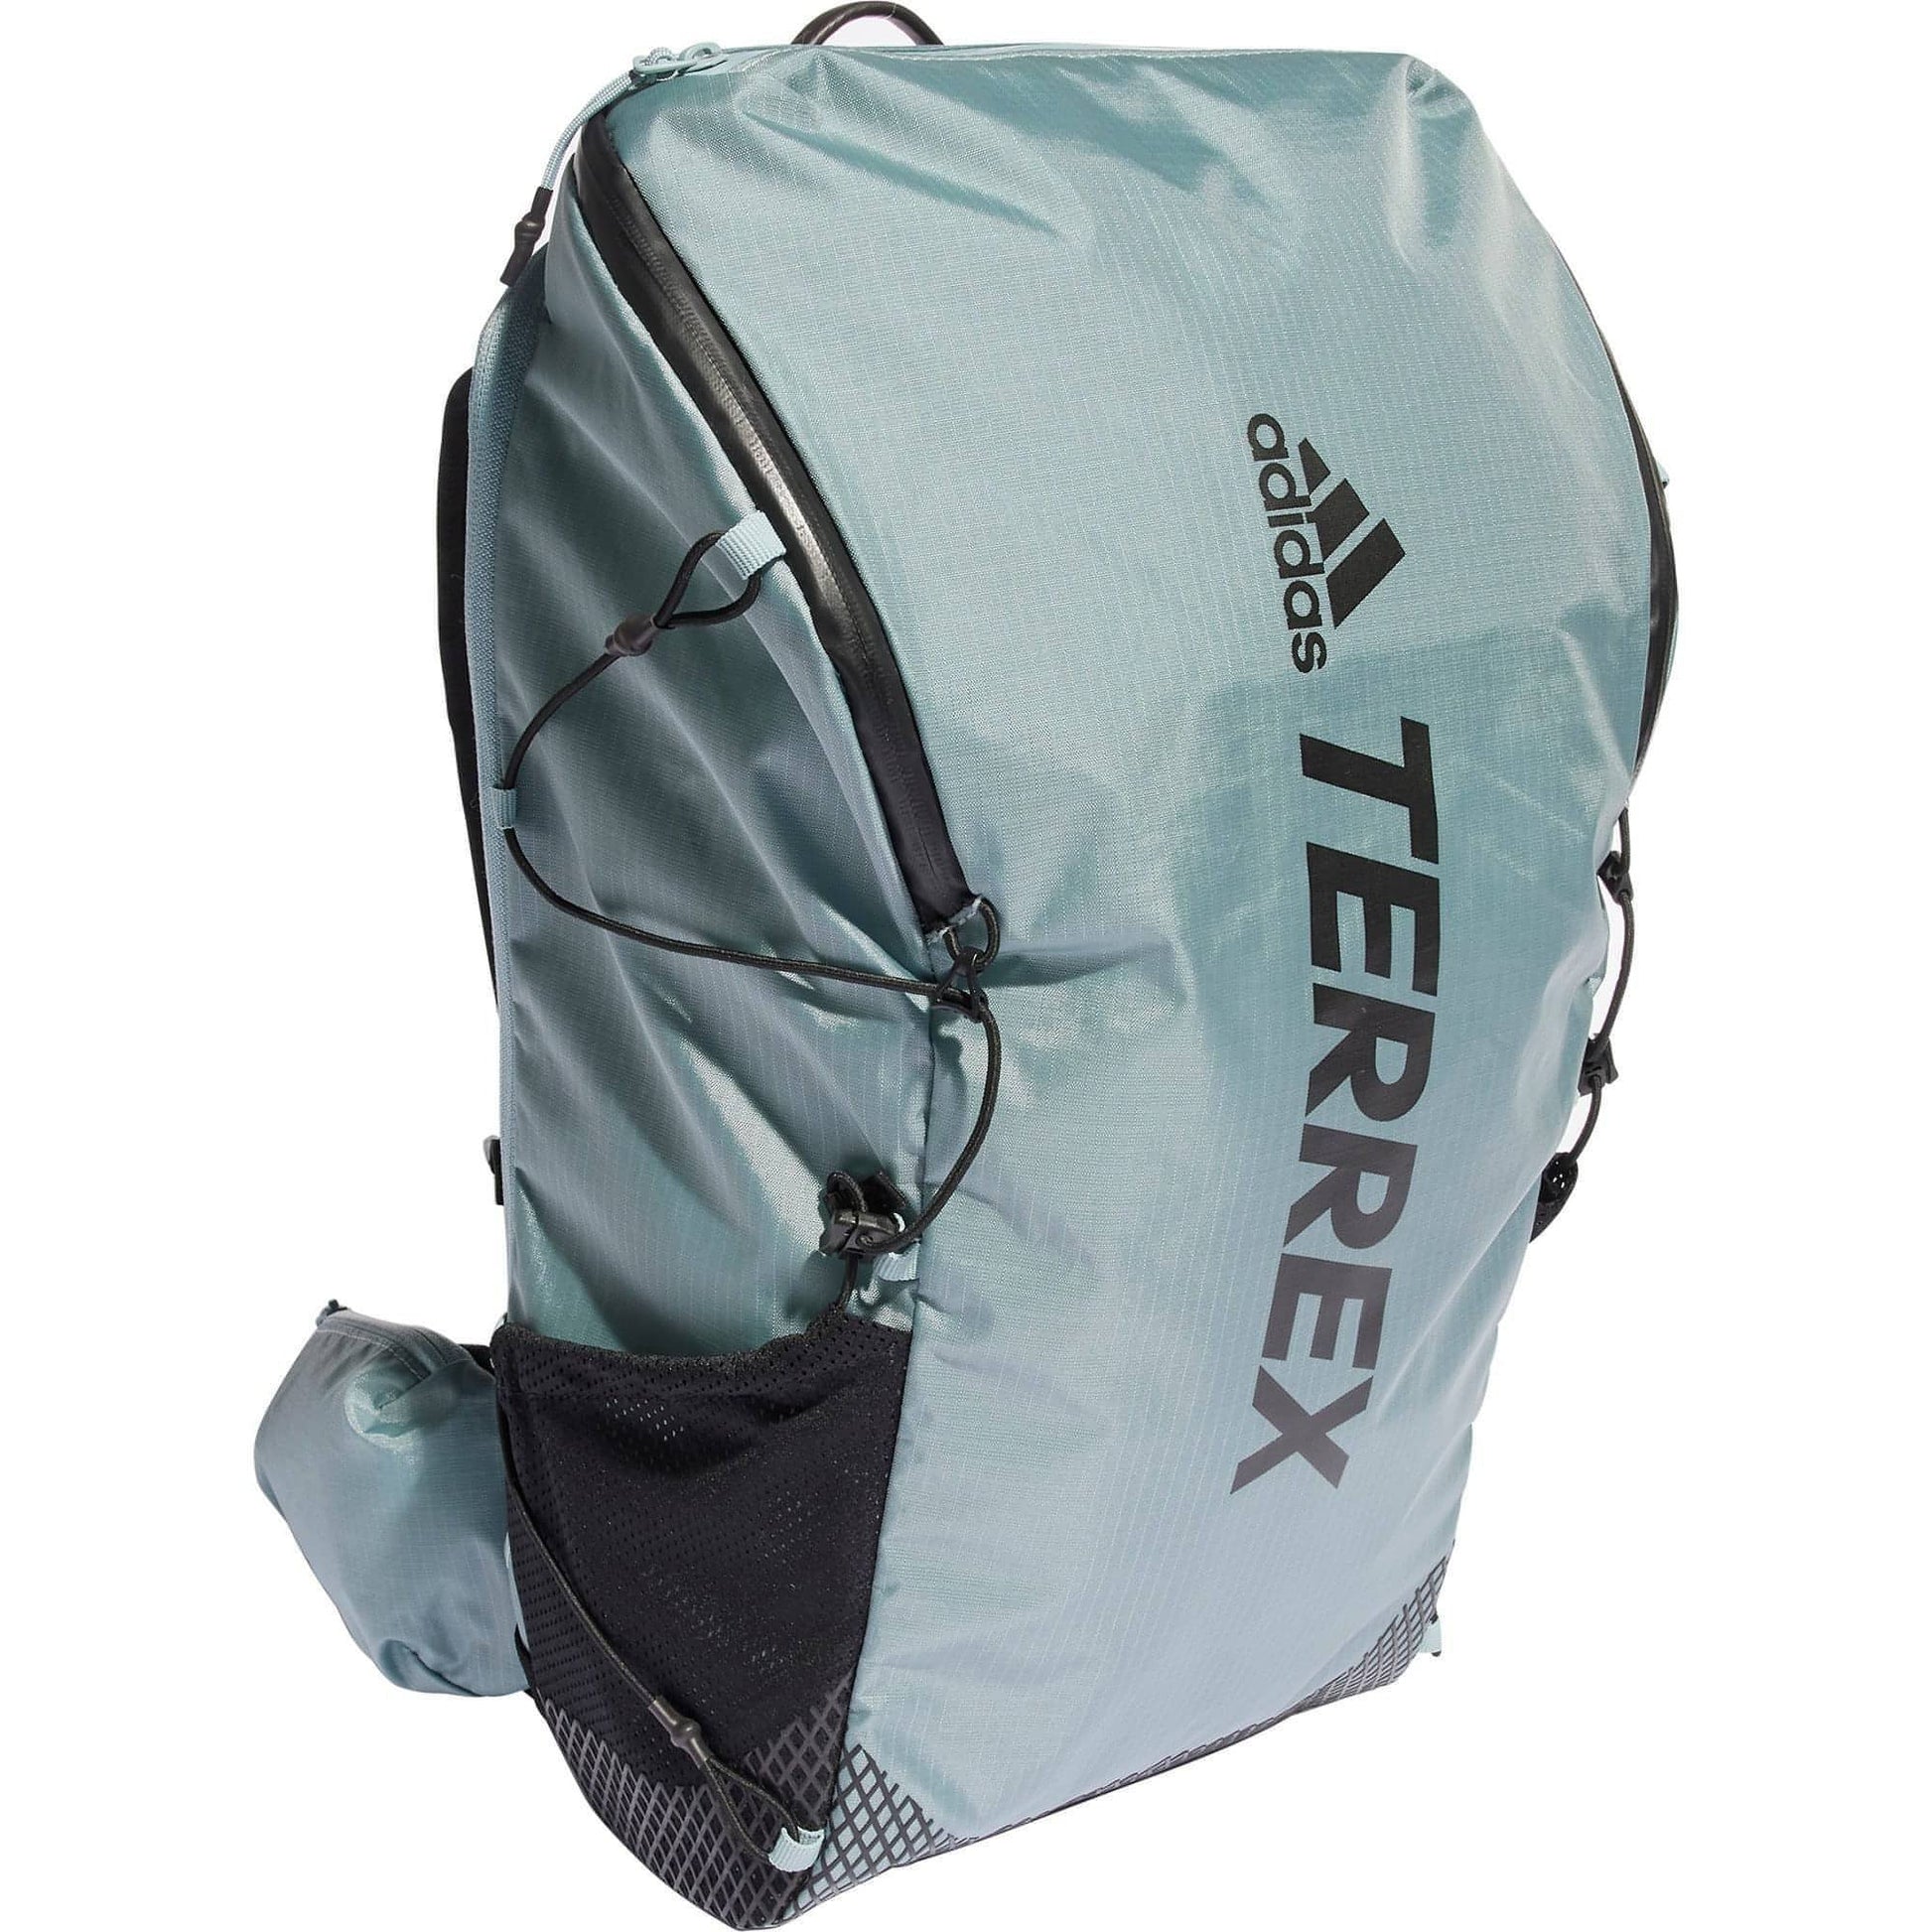 Adidas Terrex Aeroready Backpack Hb6259 Side - Side View